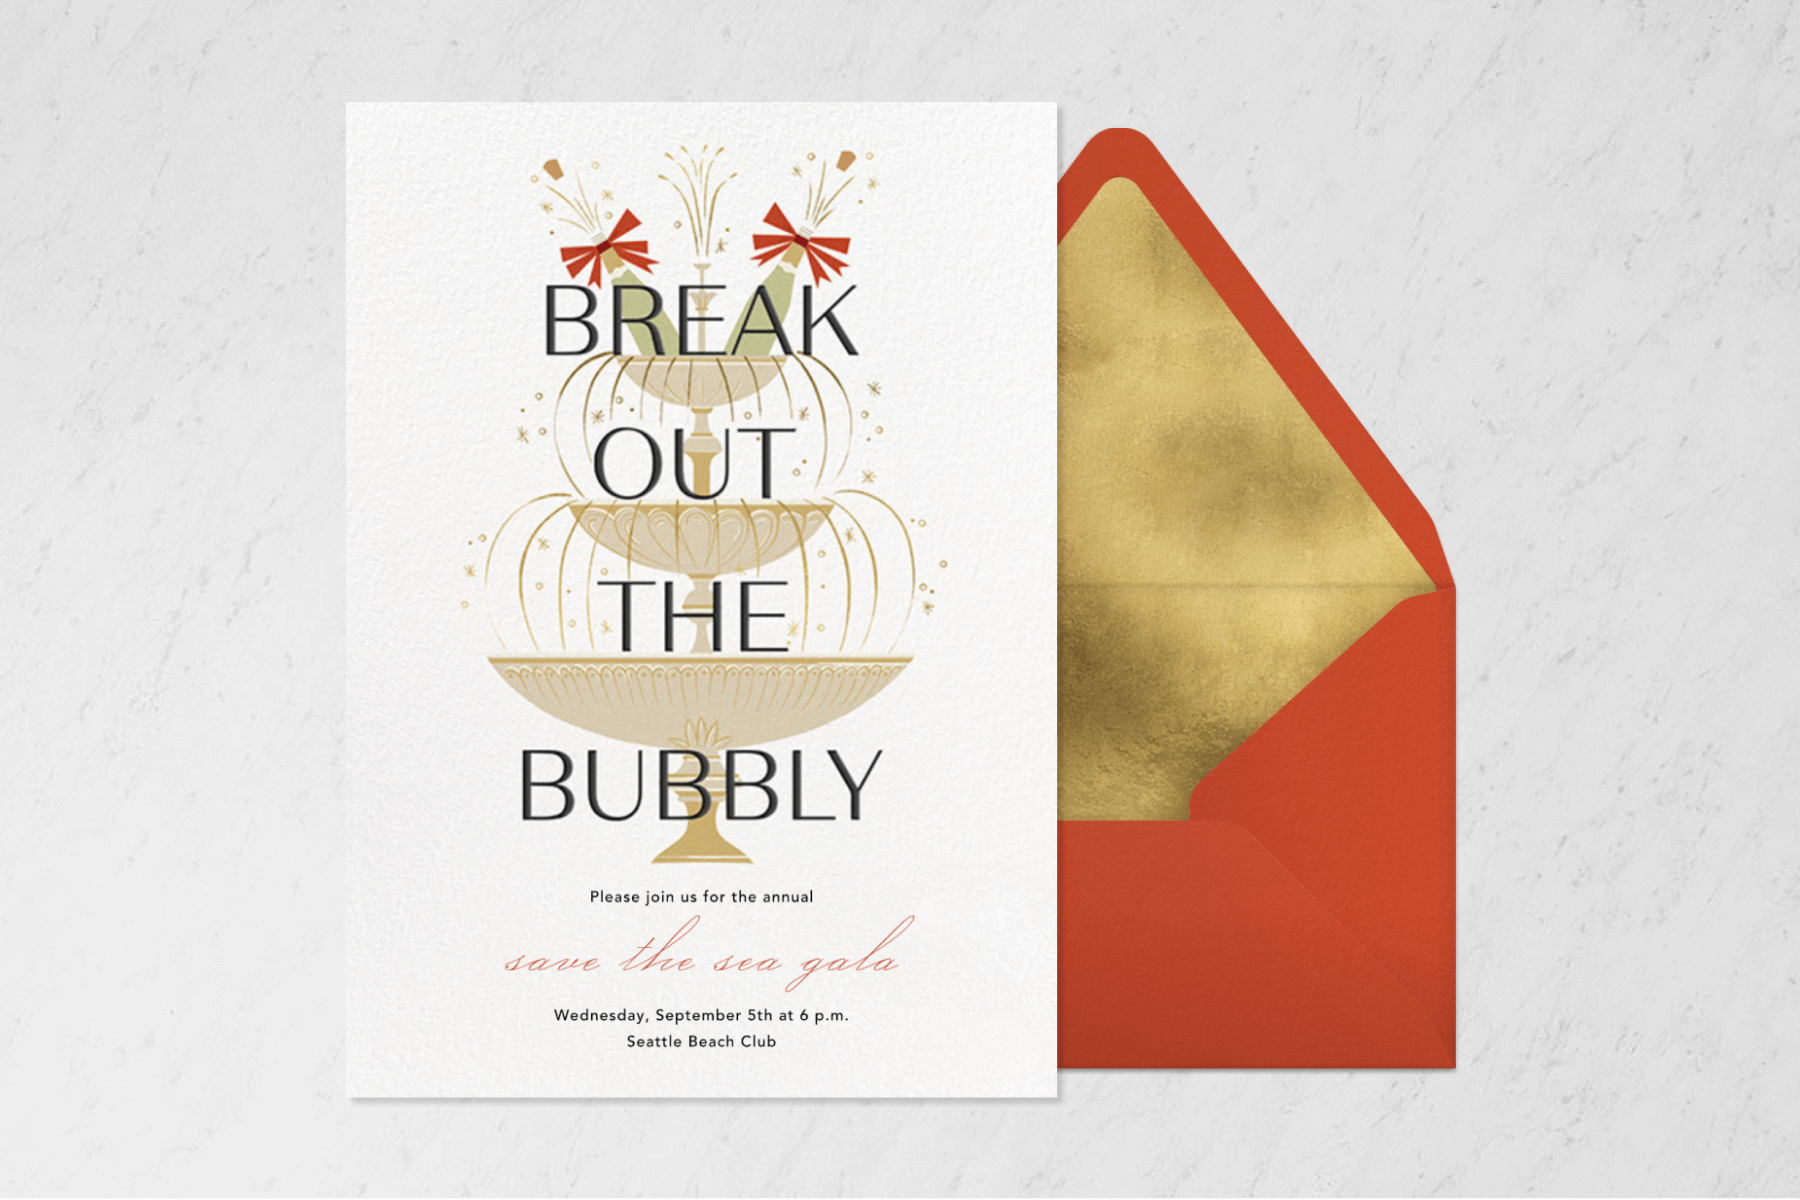 A “Save the Sea” gala invitation with a simplified illustration of a three-tiered Champagne fountain with two bottles on top and the words “Break Out the Bubbly” beside a red envelope with gold liner.